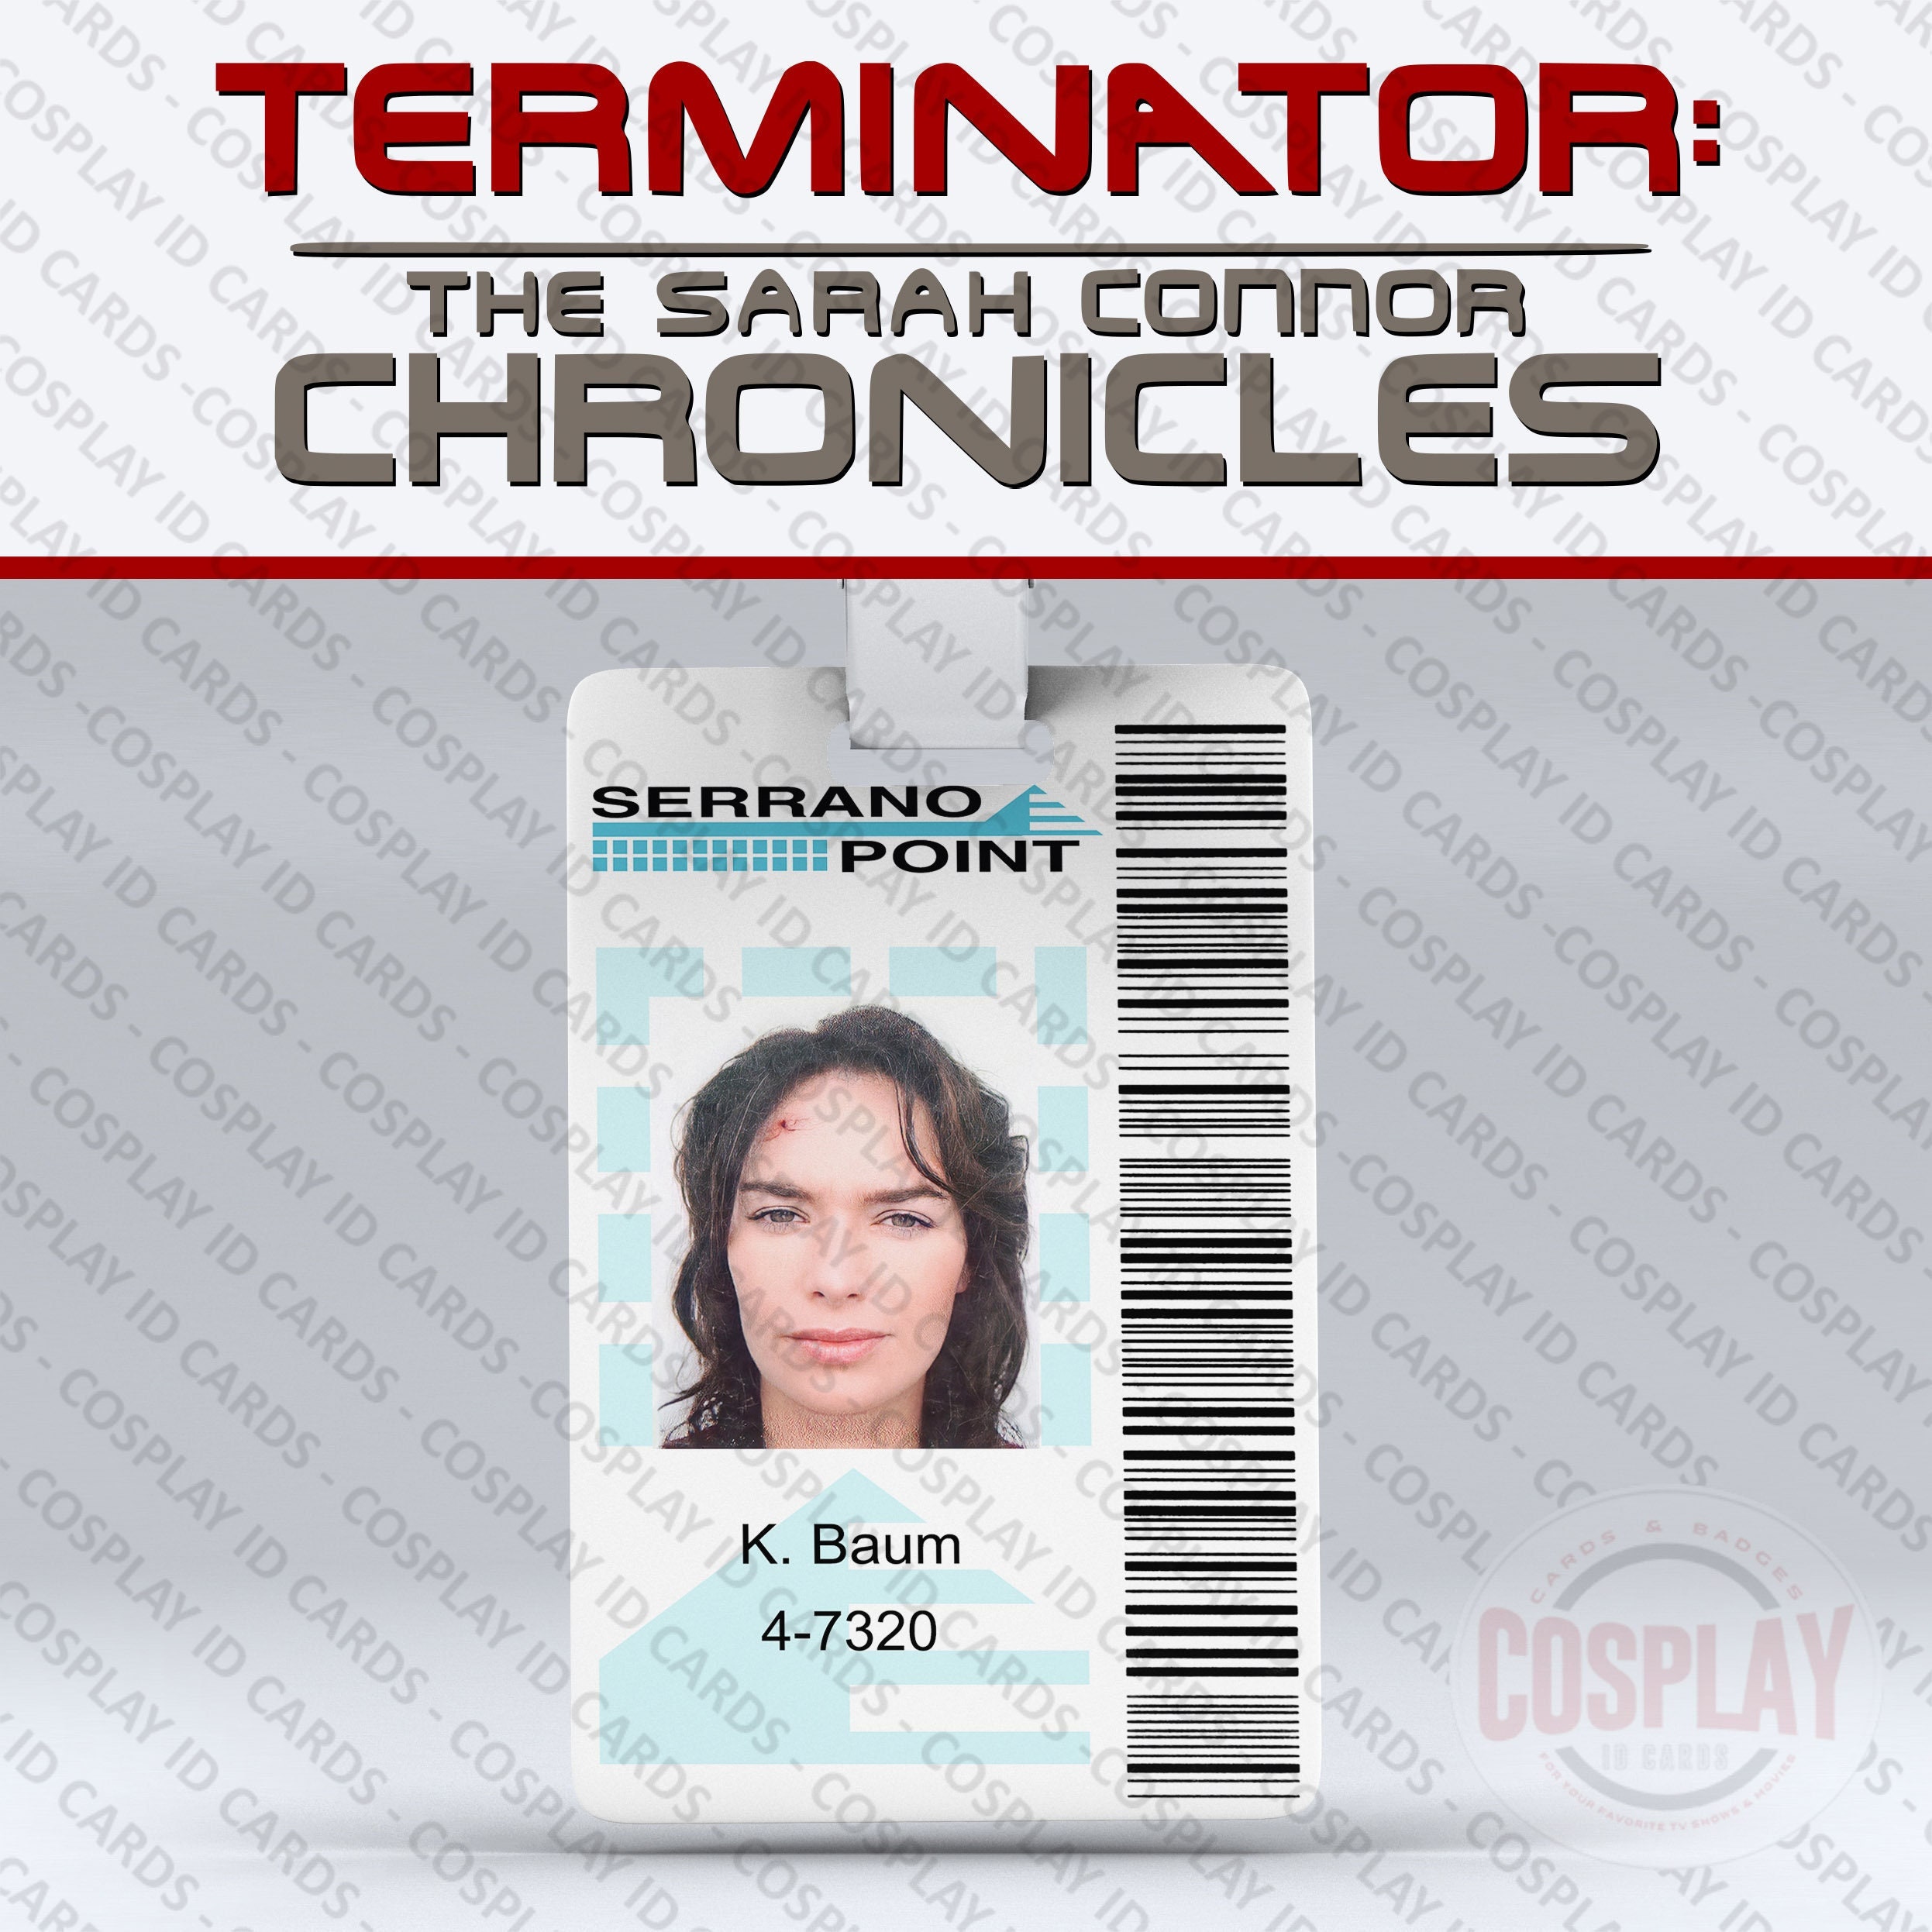 Terminator: the Sarah Connor Chronicles ID Badges, Cosplay ID